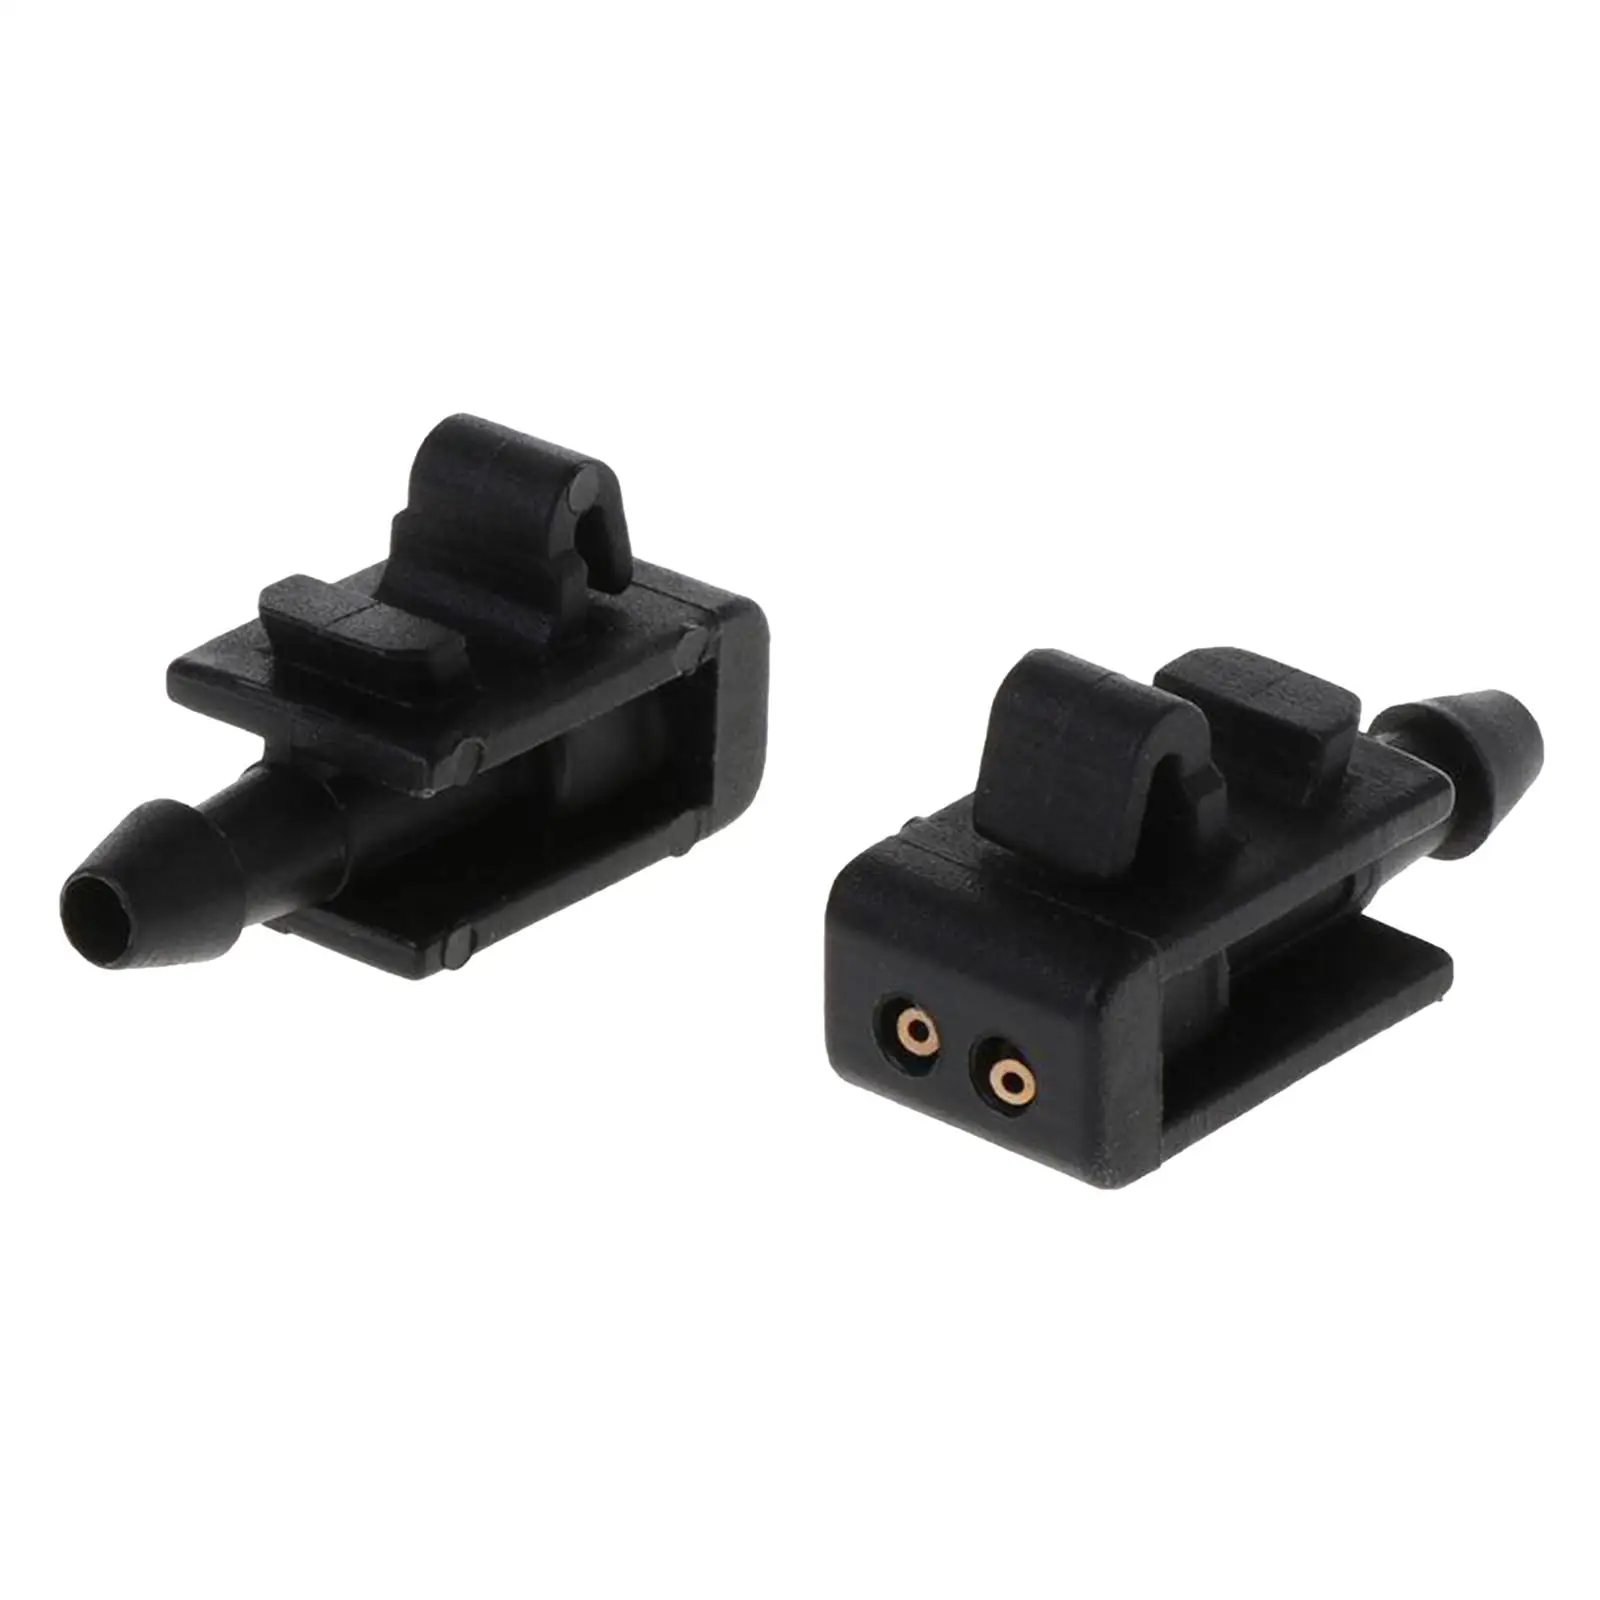 1 Pair Auto Windshield Washer Spray Nozzles Jet for II Scenic II